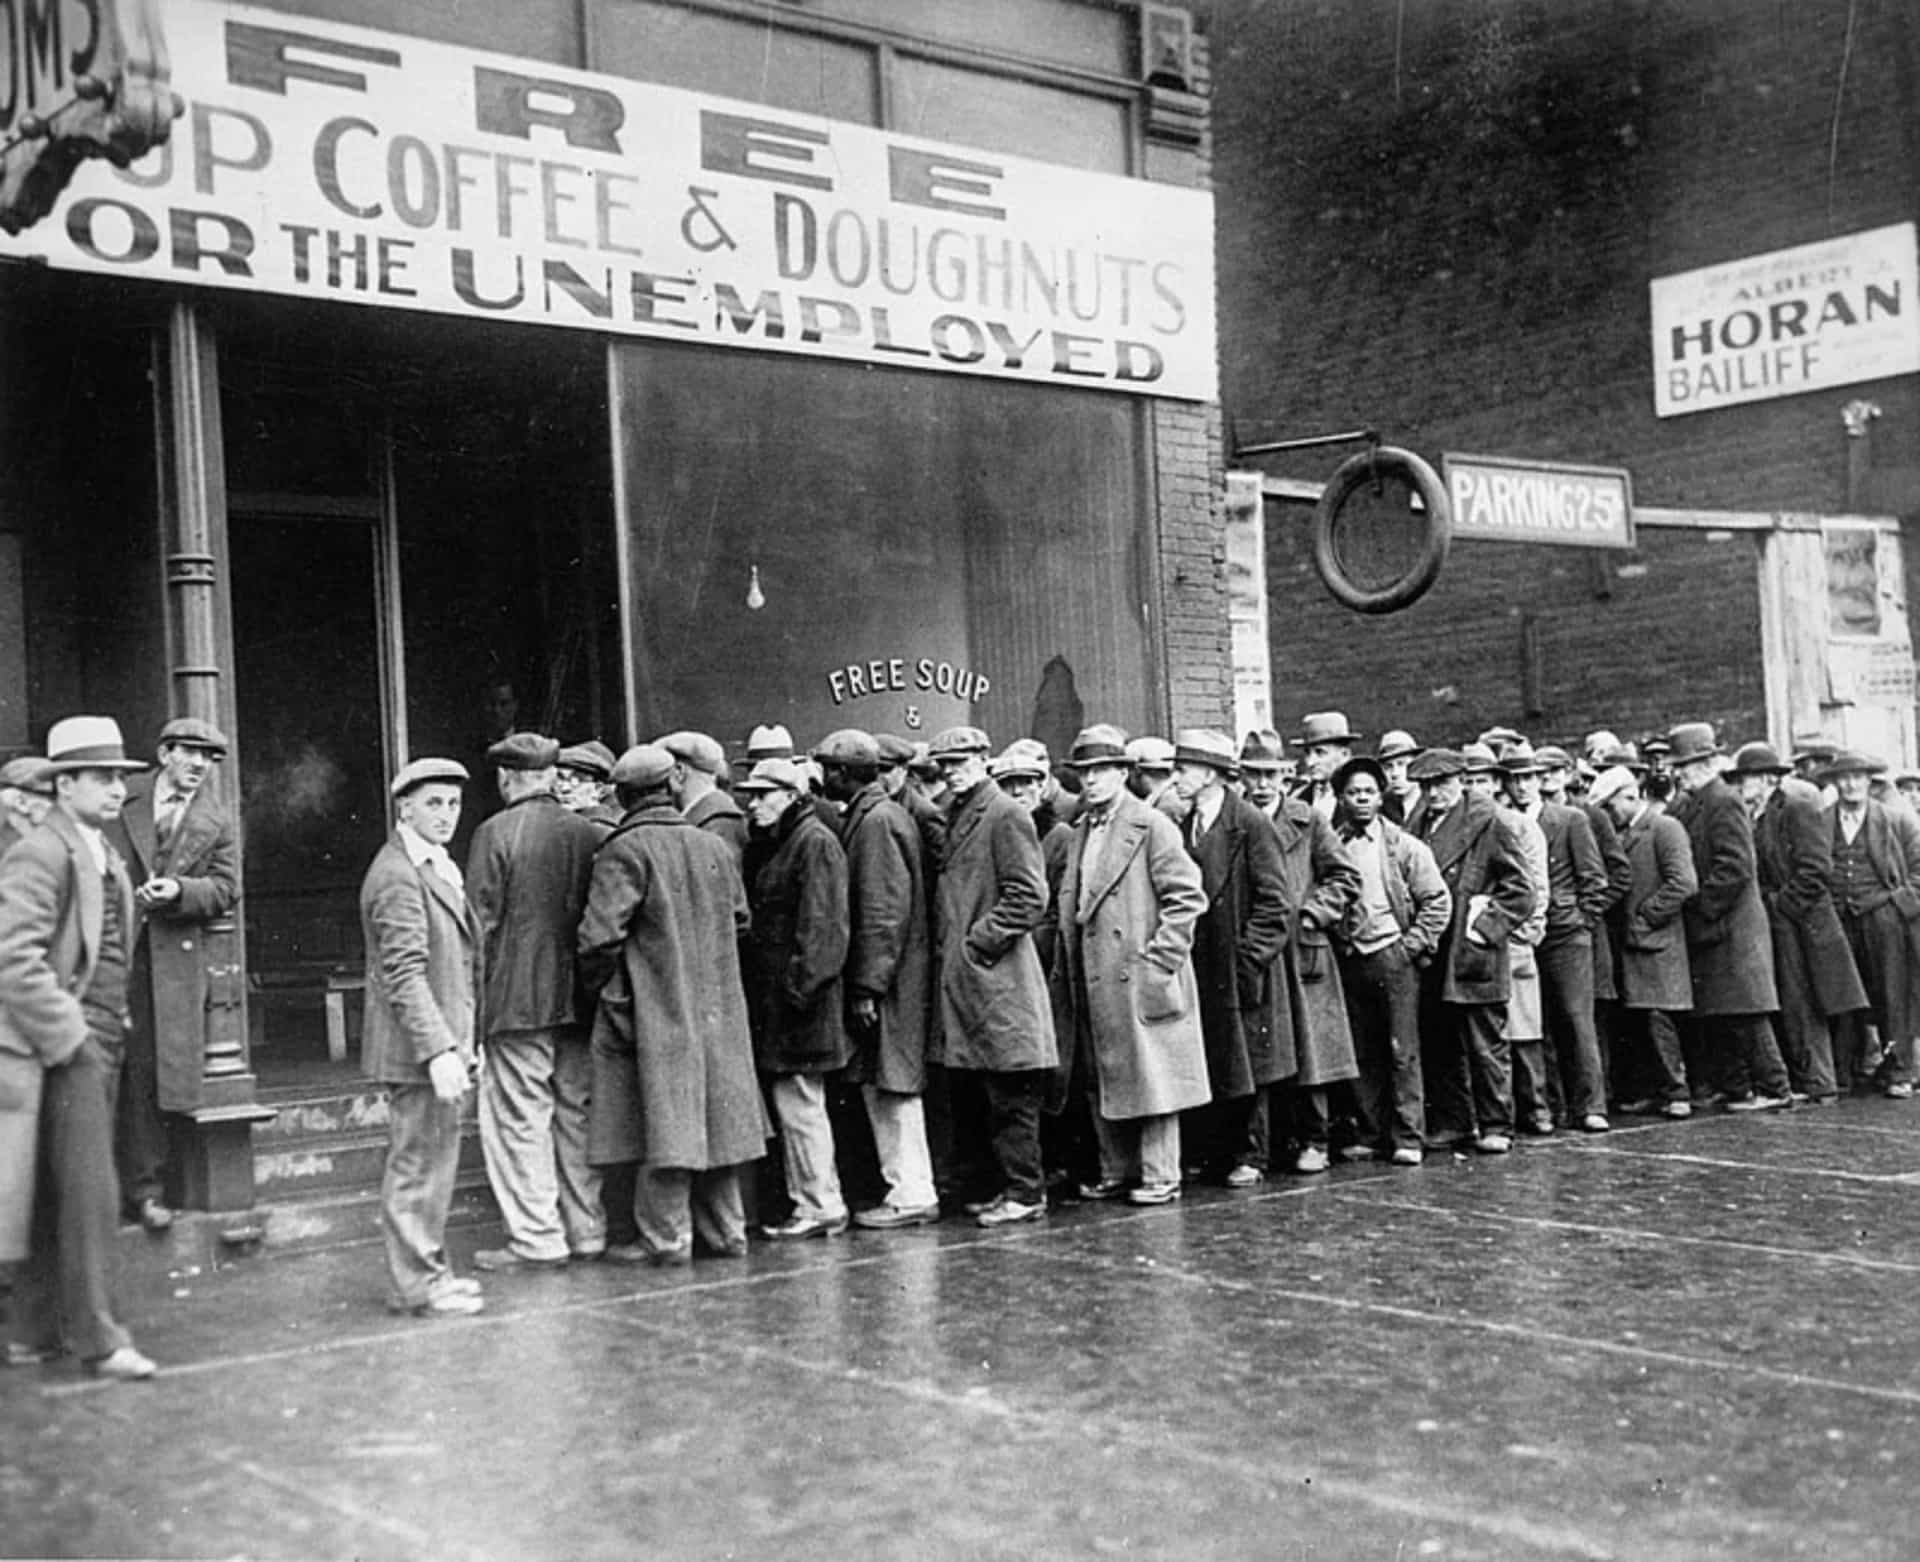 <p>Capone attempted to clean up his image by playing on public sentiment. He did this by donating to charities and even sponsored a soup kitchen (pictured), which was patronized every day by unemployed men who'd queue for hours for coffee and doughnuts.</p>